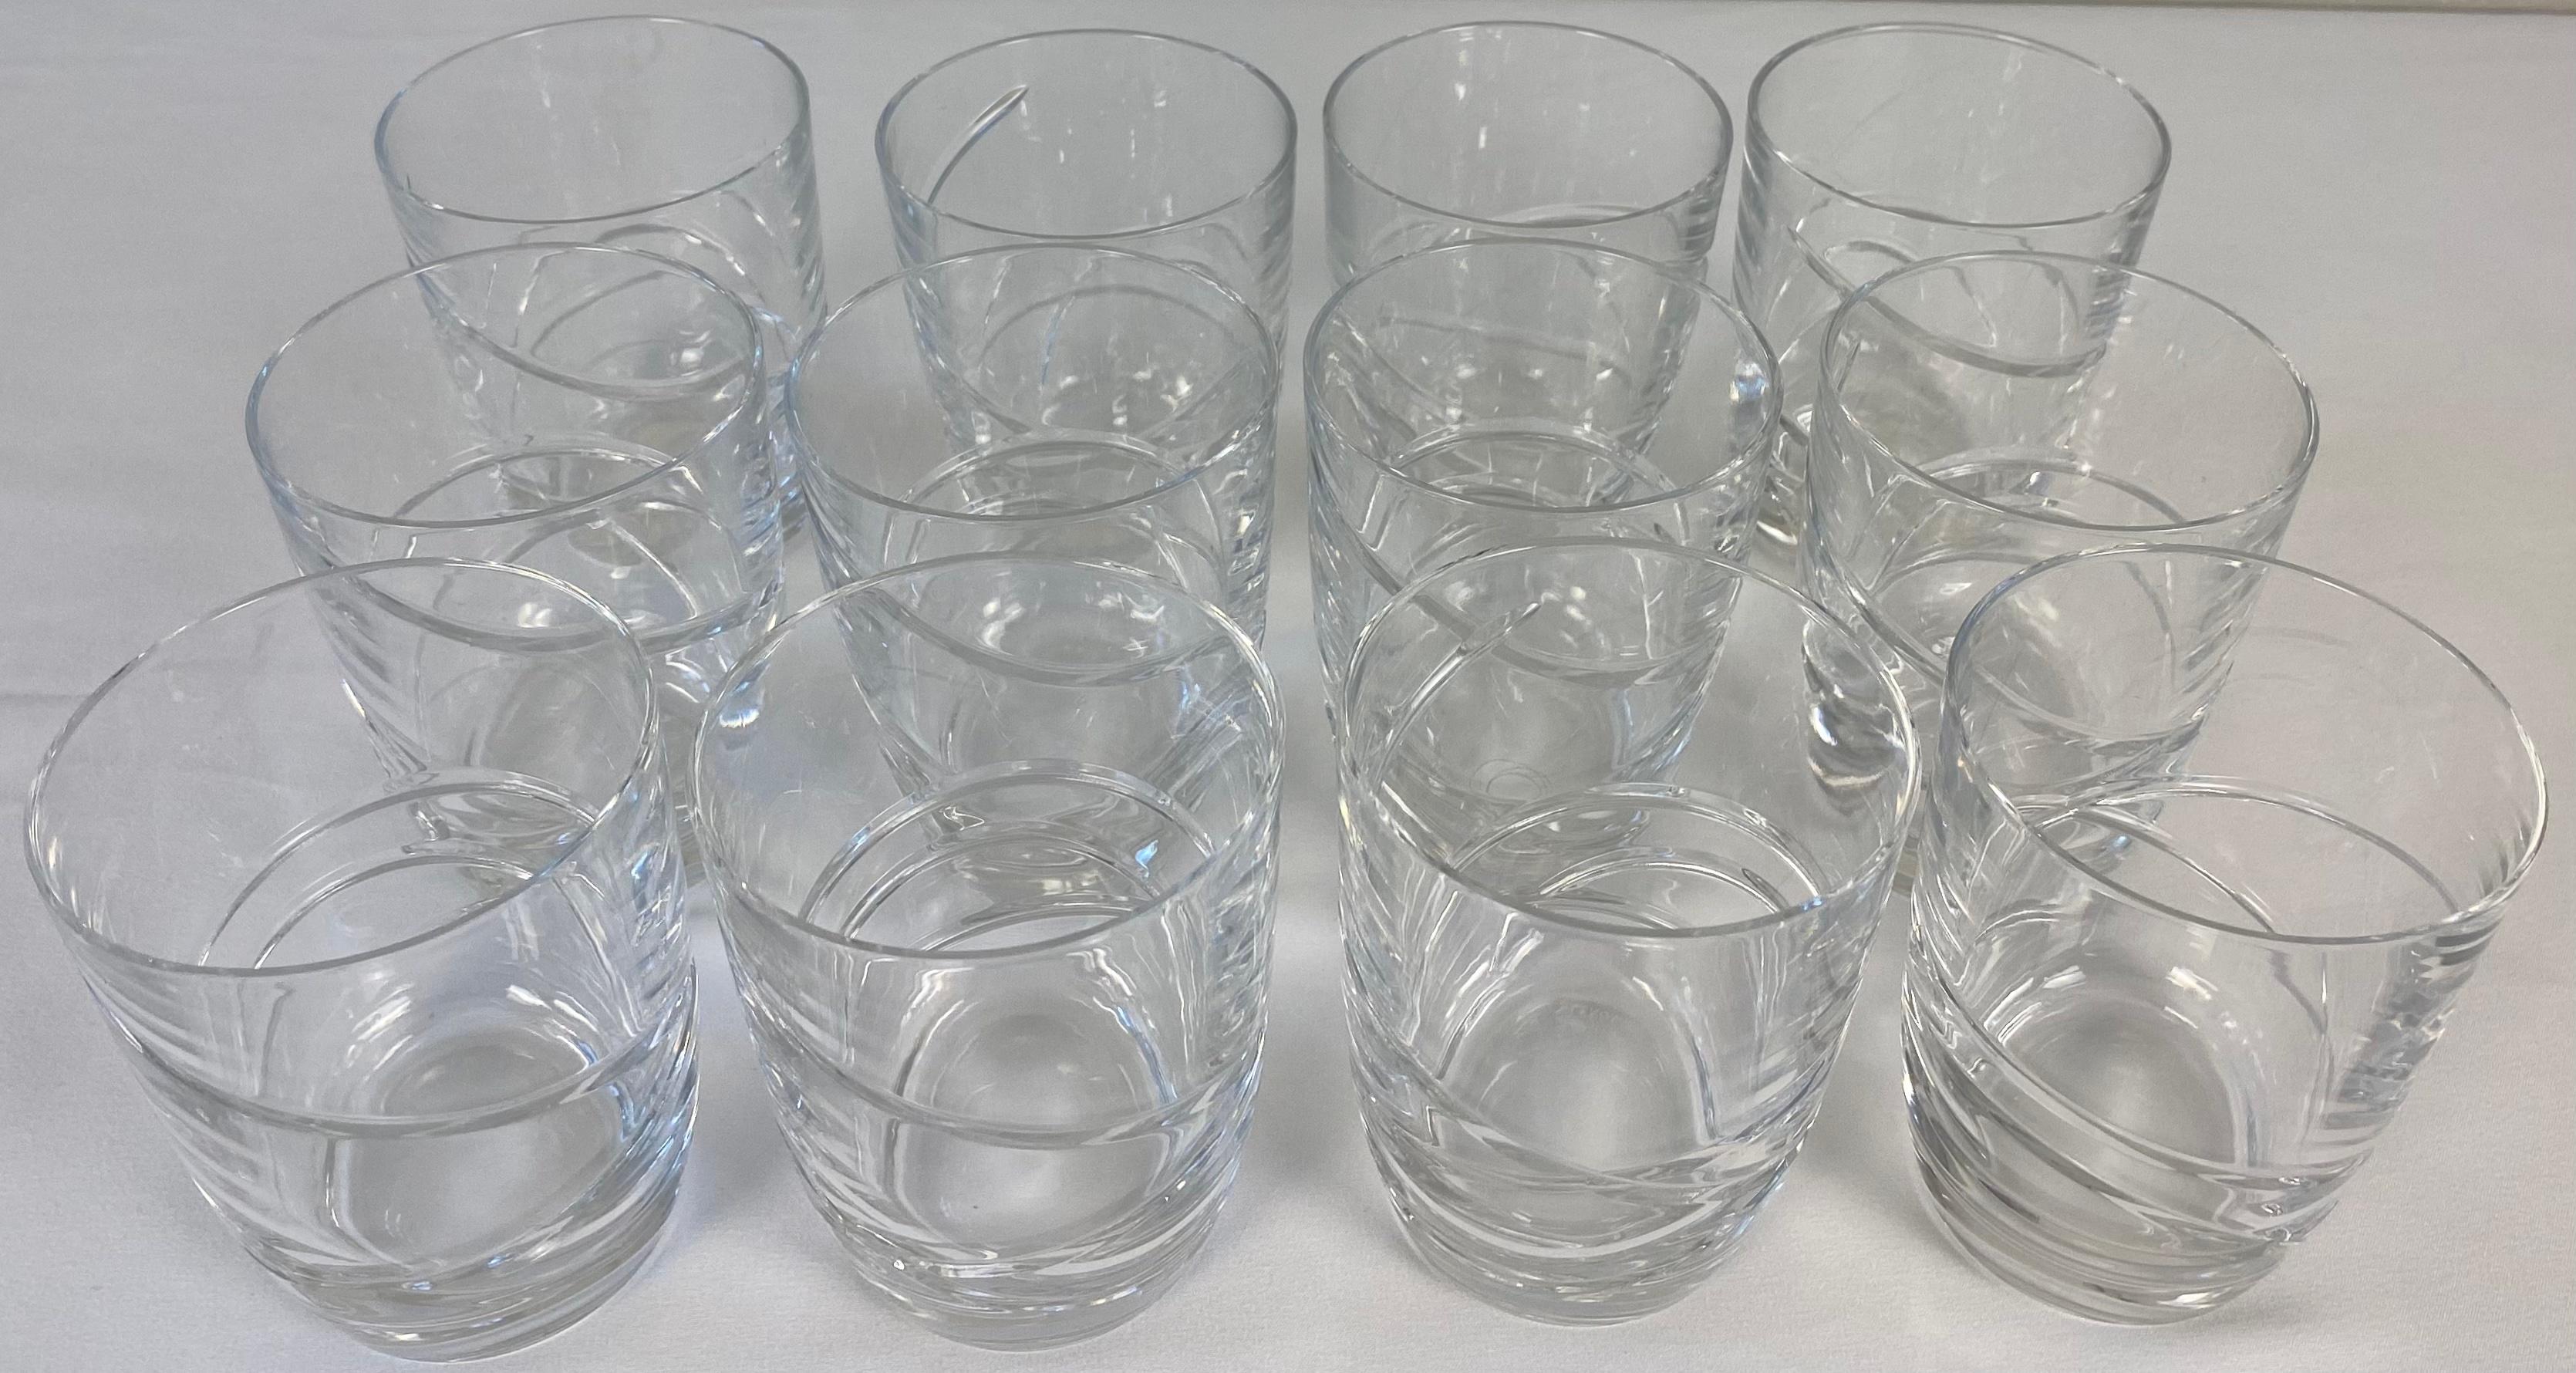 A fine high quality vintage set of 12 crystal whiskey or liquor glasses by Lenox. 
American design made in the Czech Republic.

Bears the Lenox mark on the bottom. 

Measures: 3 1/8